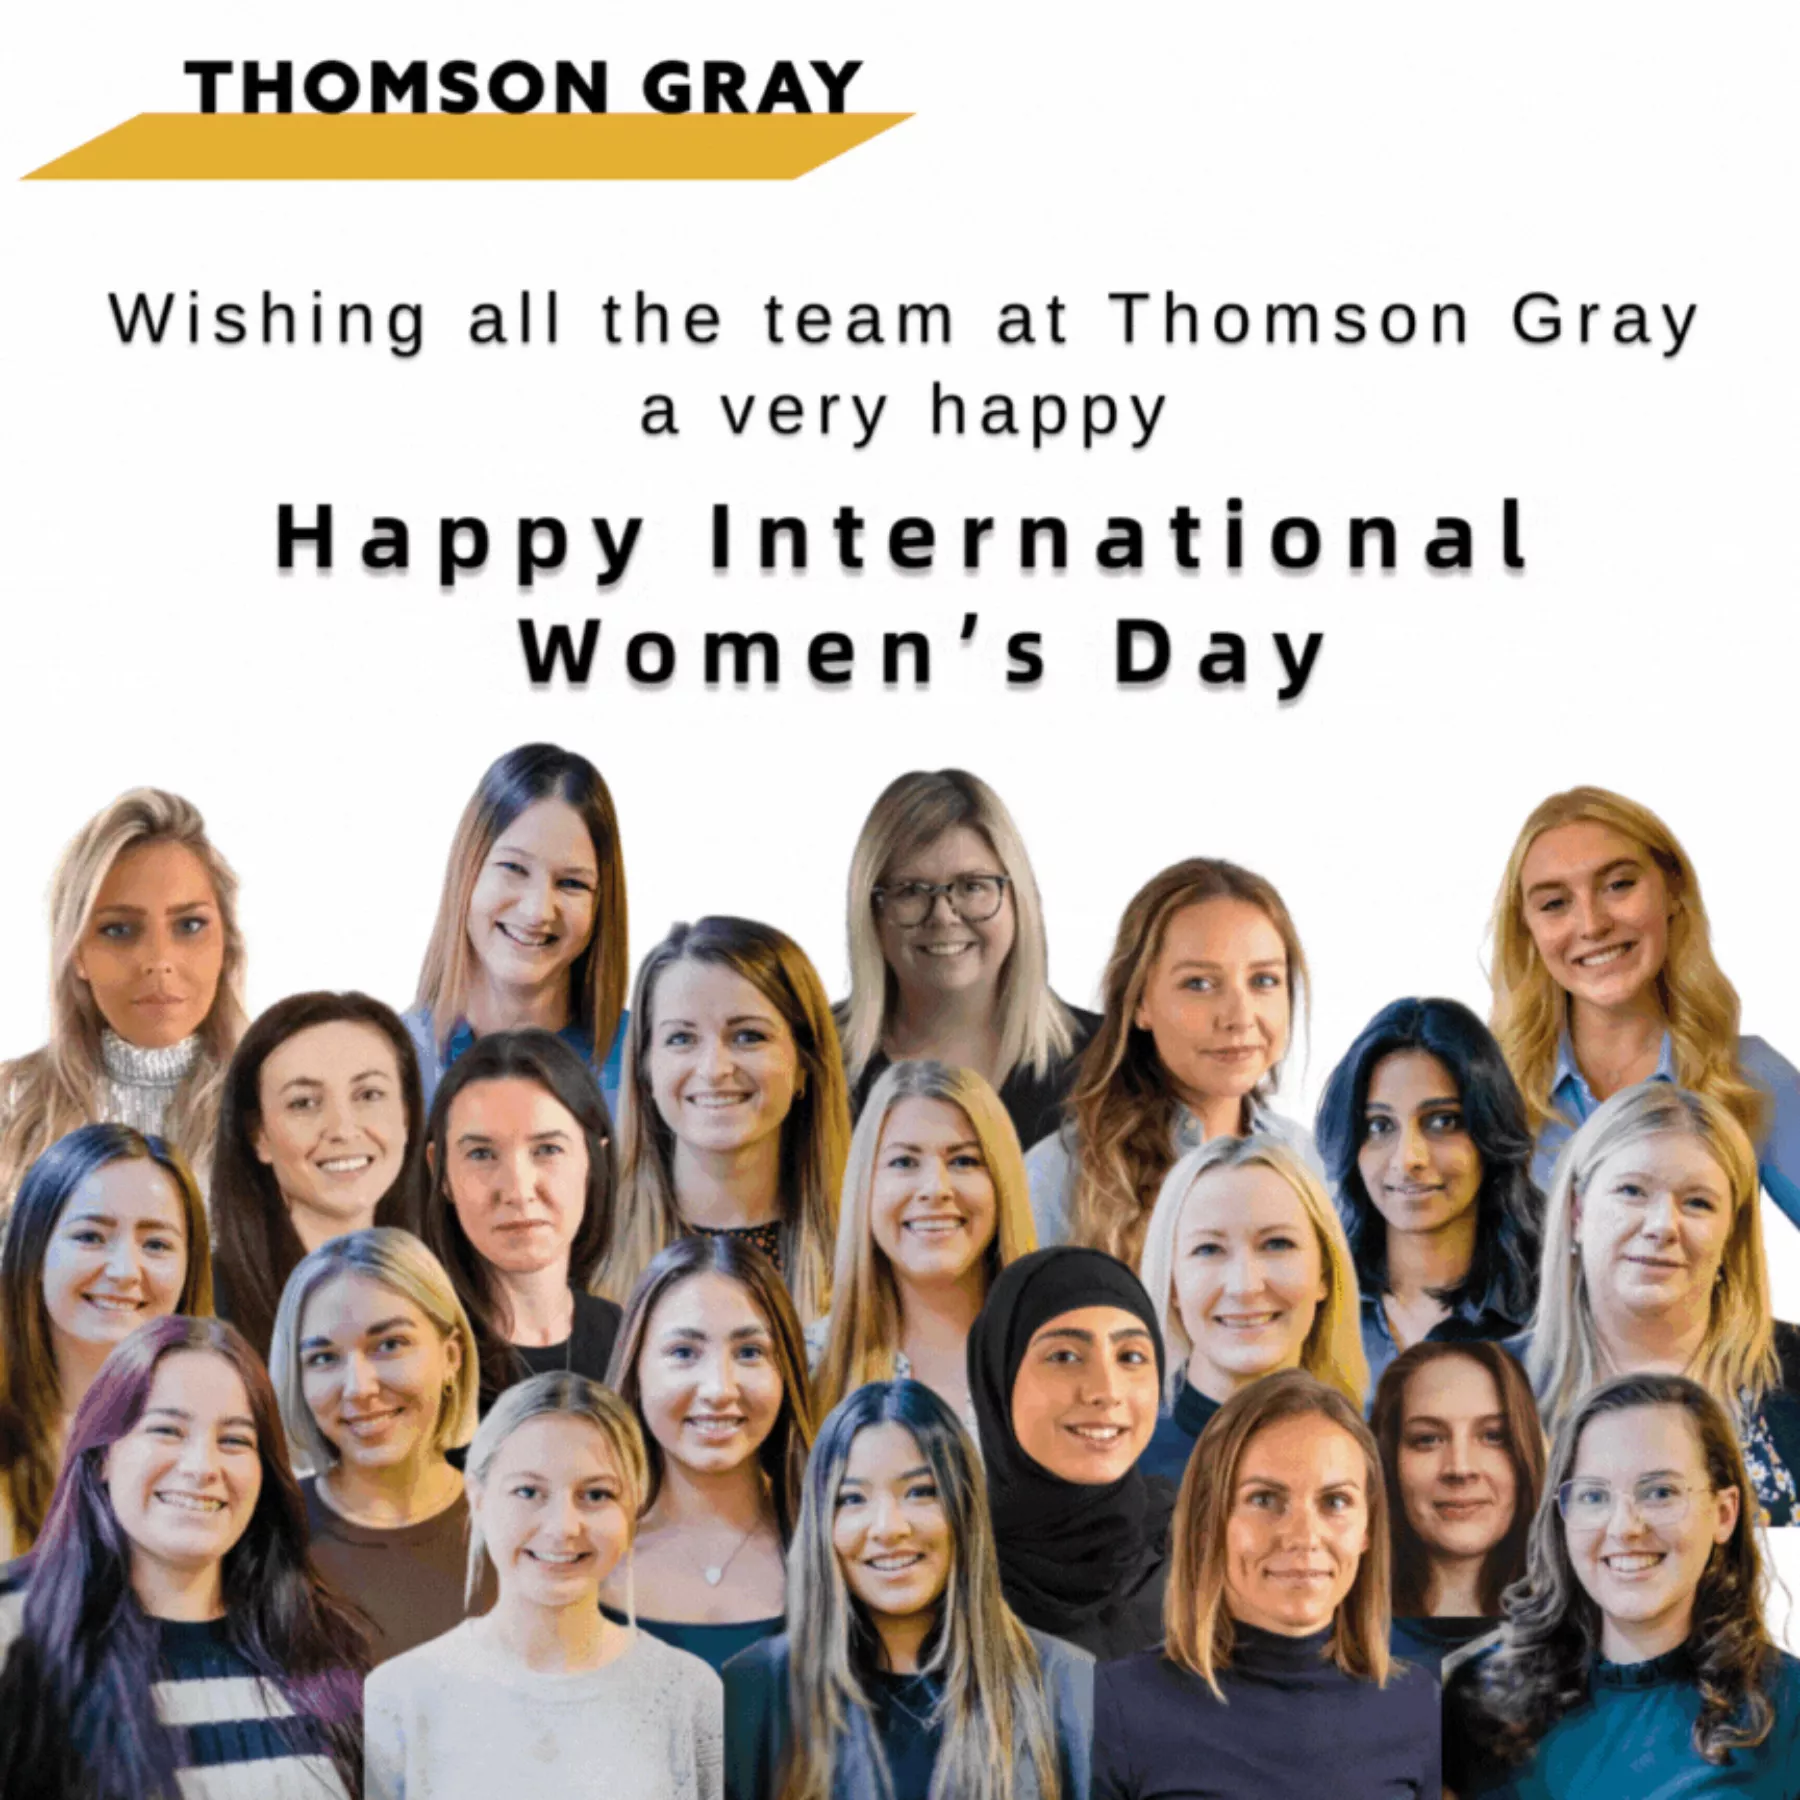 Wishing all the team at Thomson Gray a very happy International Women's Day. Image also shows a collage of female members of the team.